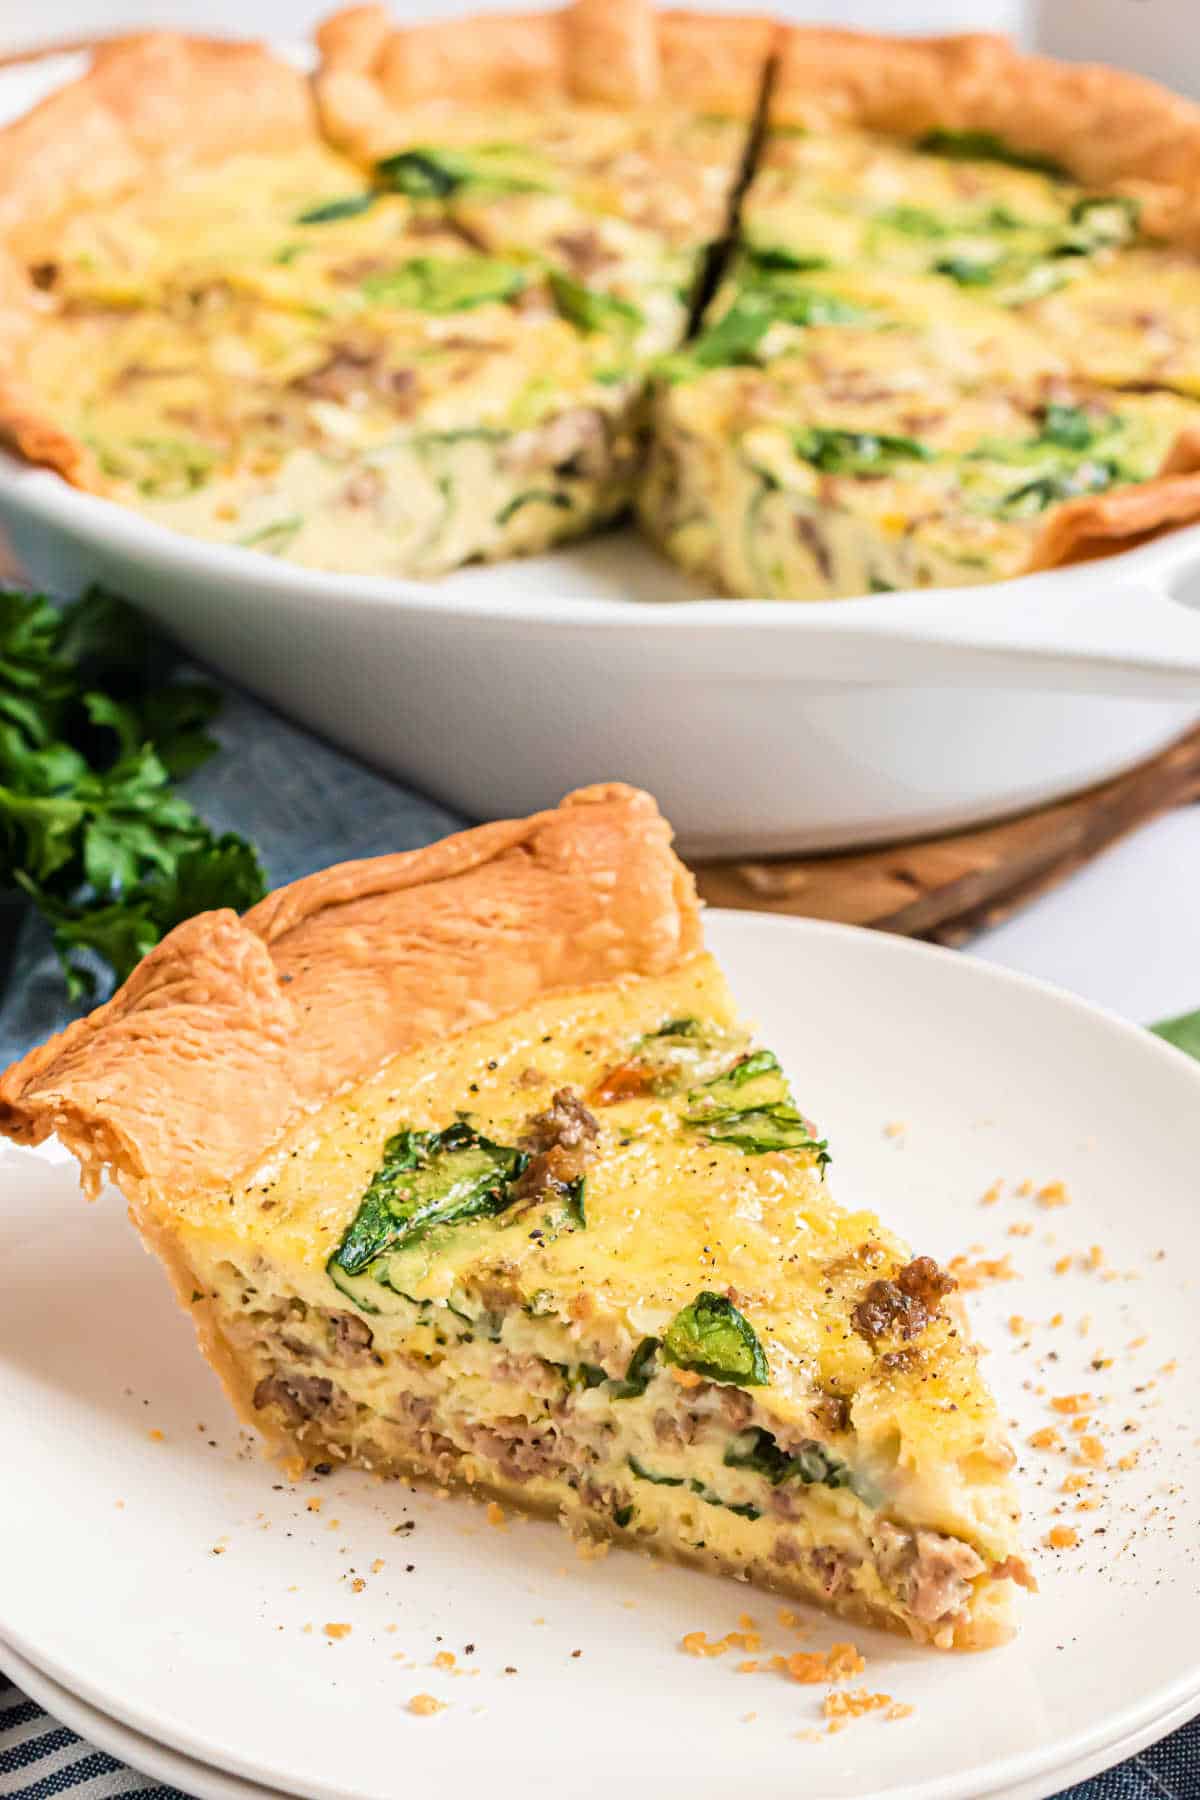 Slice of spinach quiche on a plate.